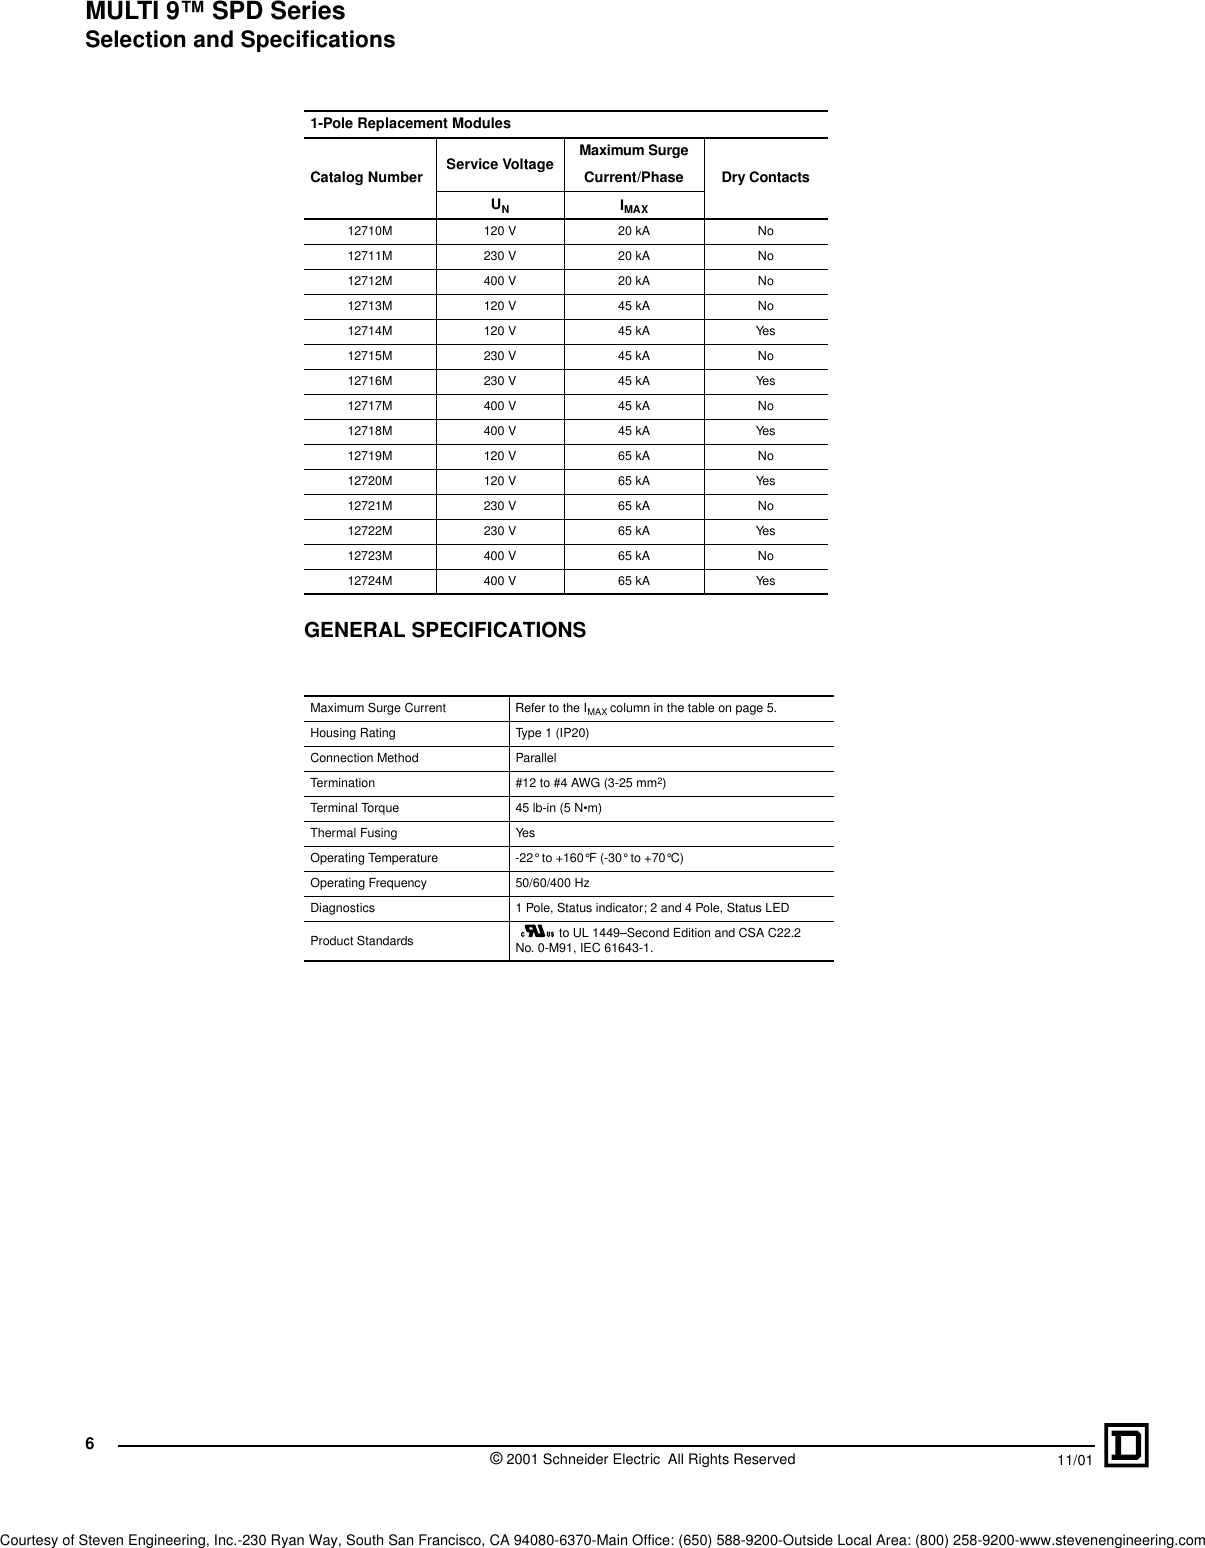 Page 6 of 8 - Surge Protective Device Transient Voltage Suppressor (TVSS) MULTI 9 SPD Series